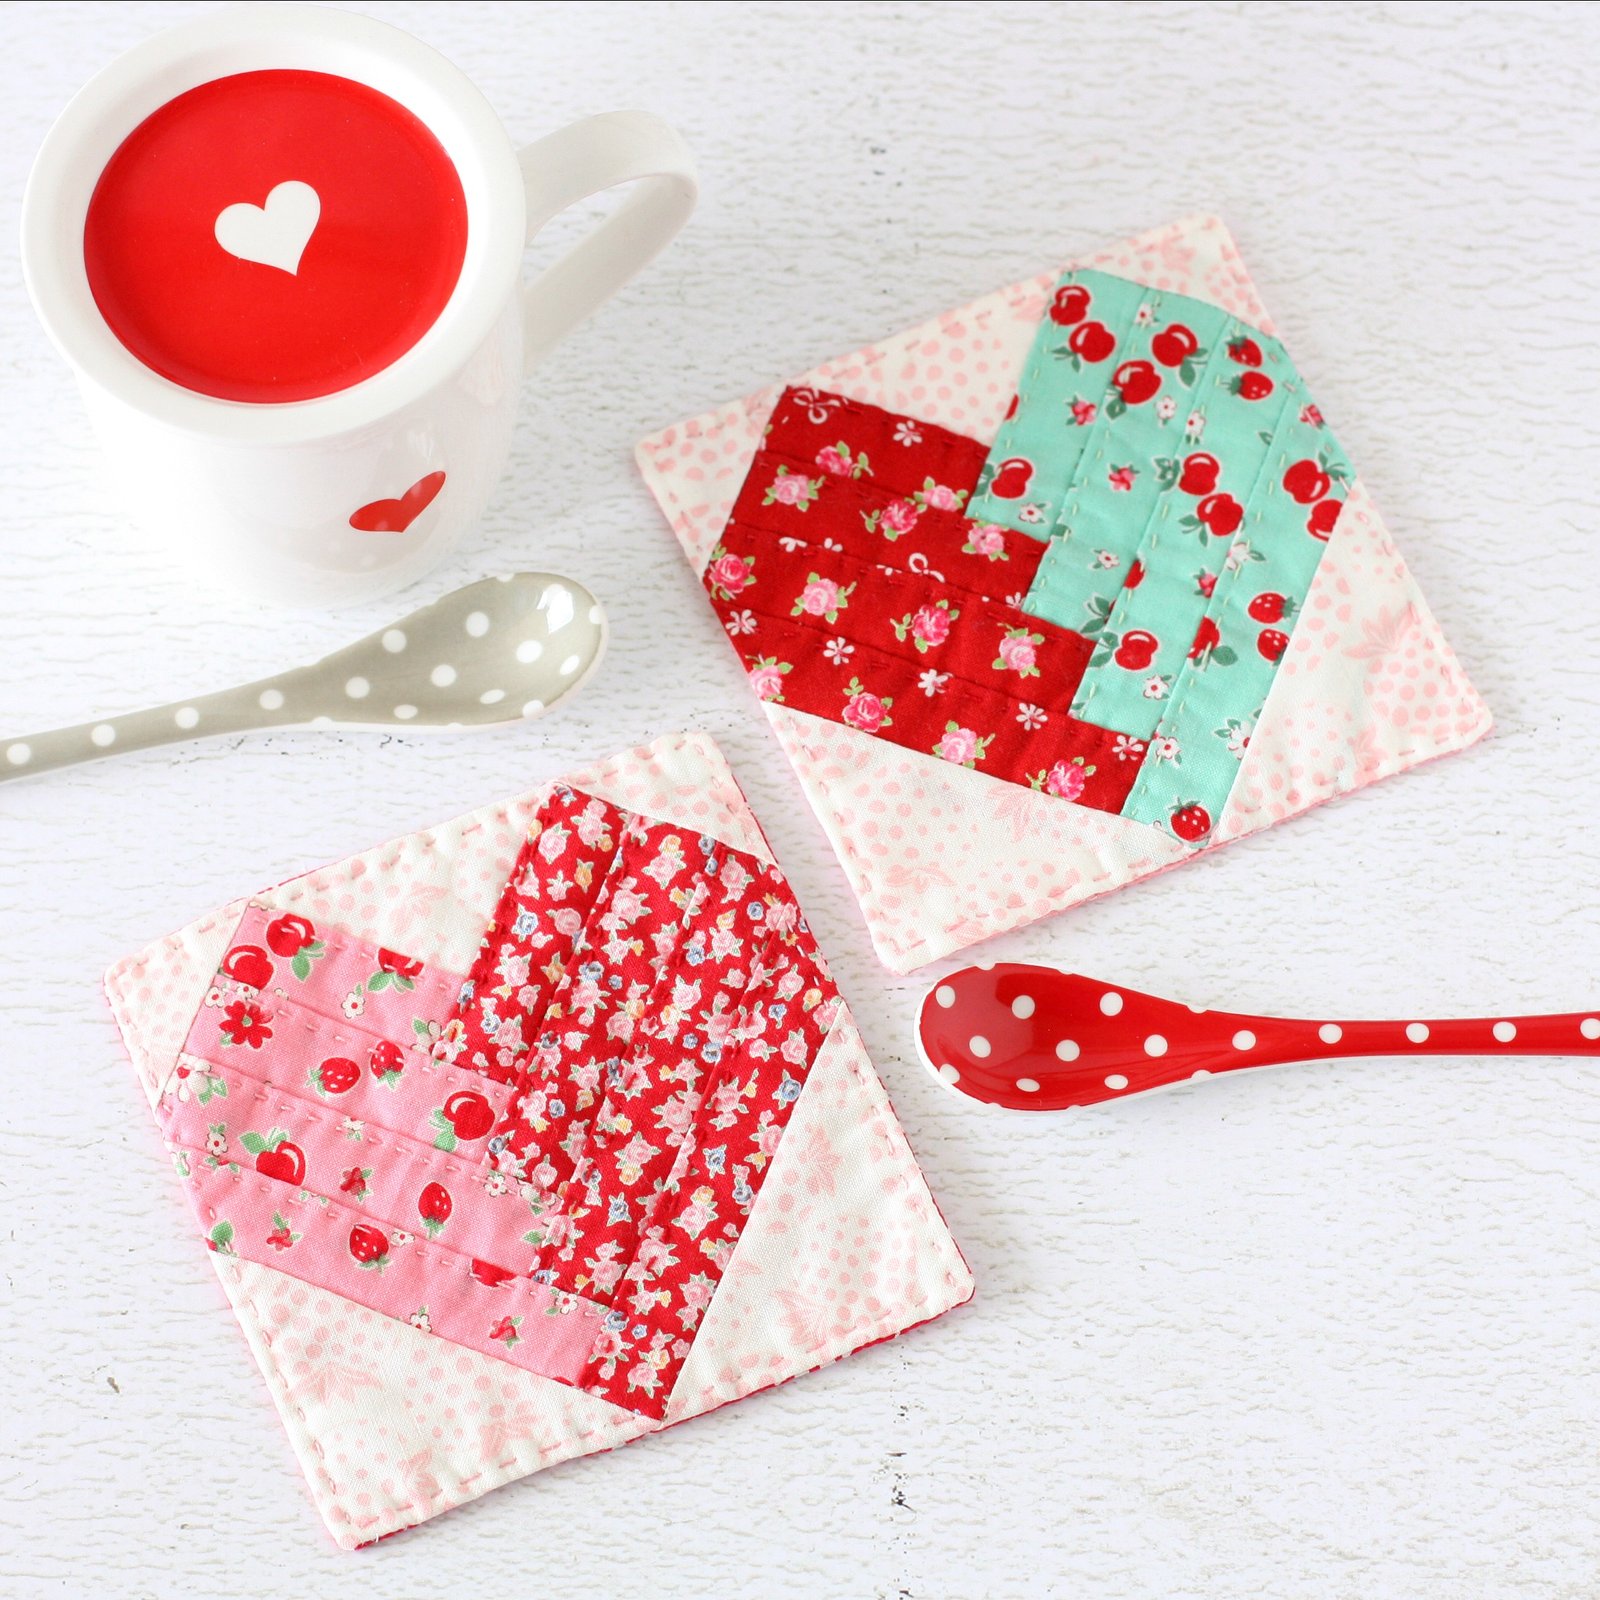 Valentines Sewing Projects from A Spoonful of Sugar   www.aspoonfulofsugardesigns.com